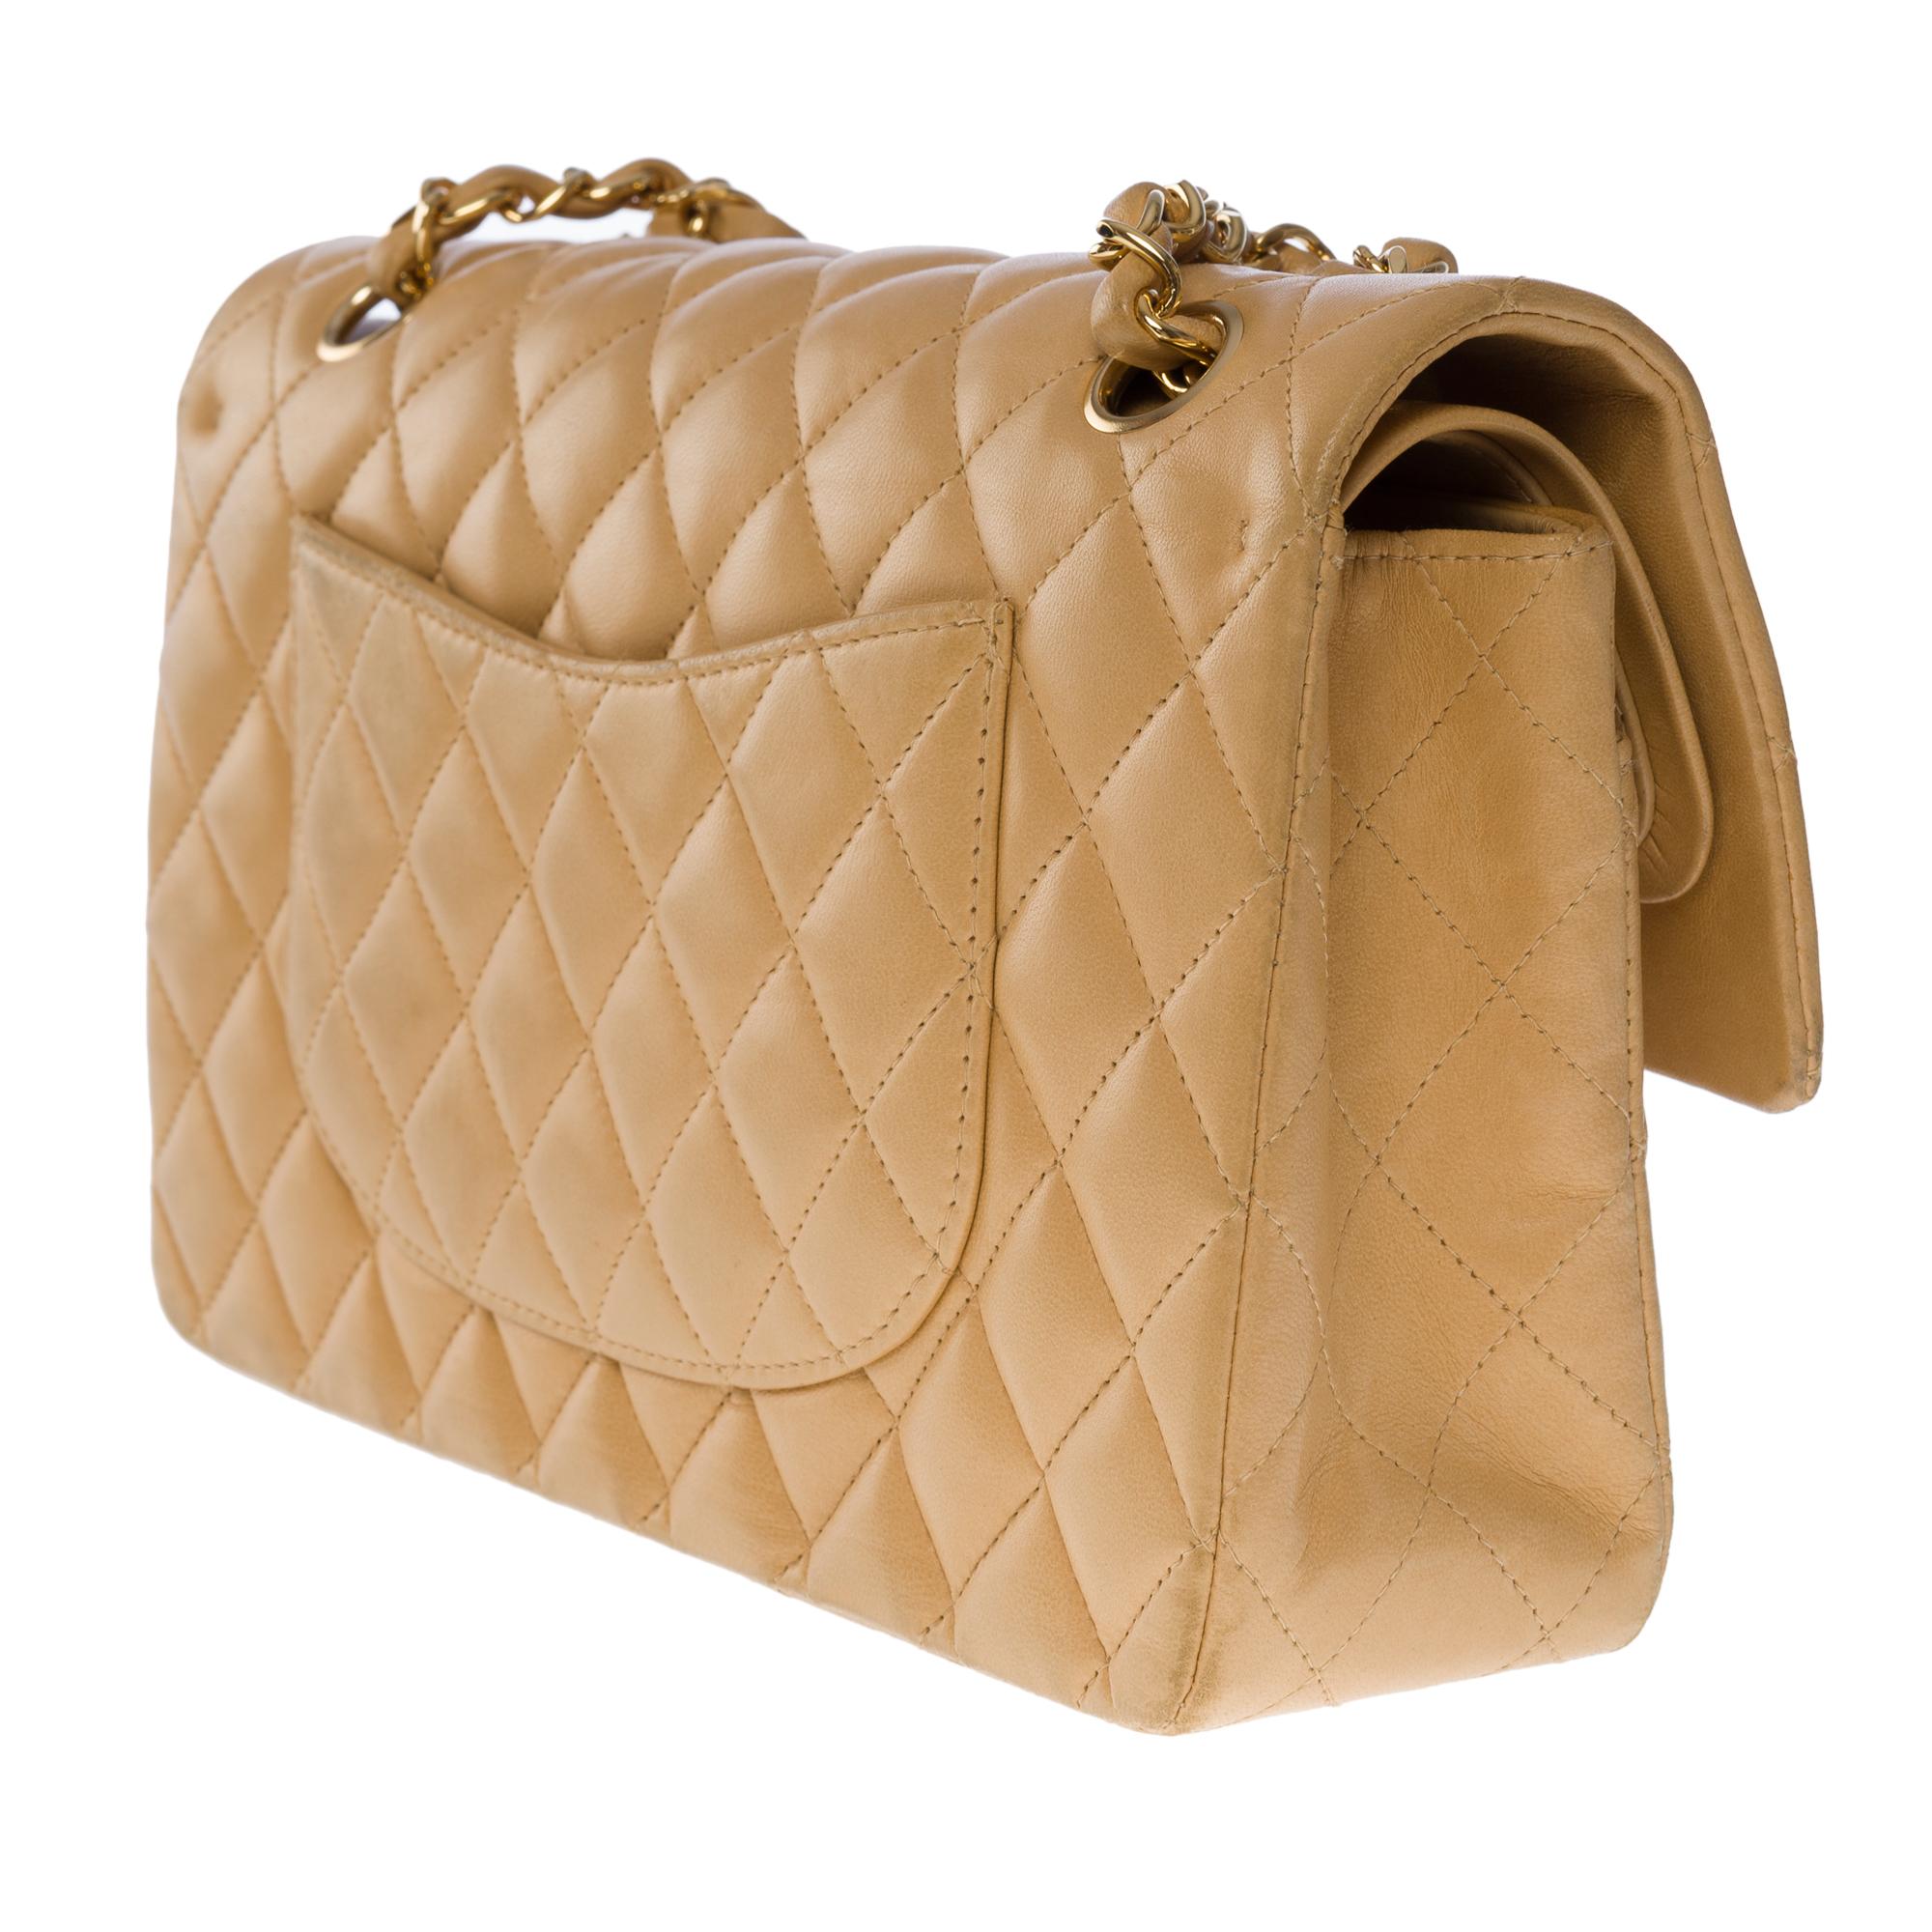 Chanel Timeless medium double flap shoulder bag in beige quilted lambskin, GHW For Sale 1